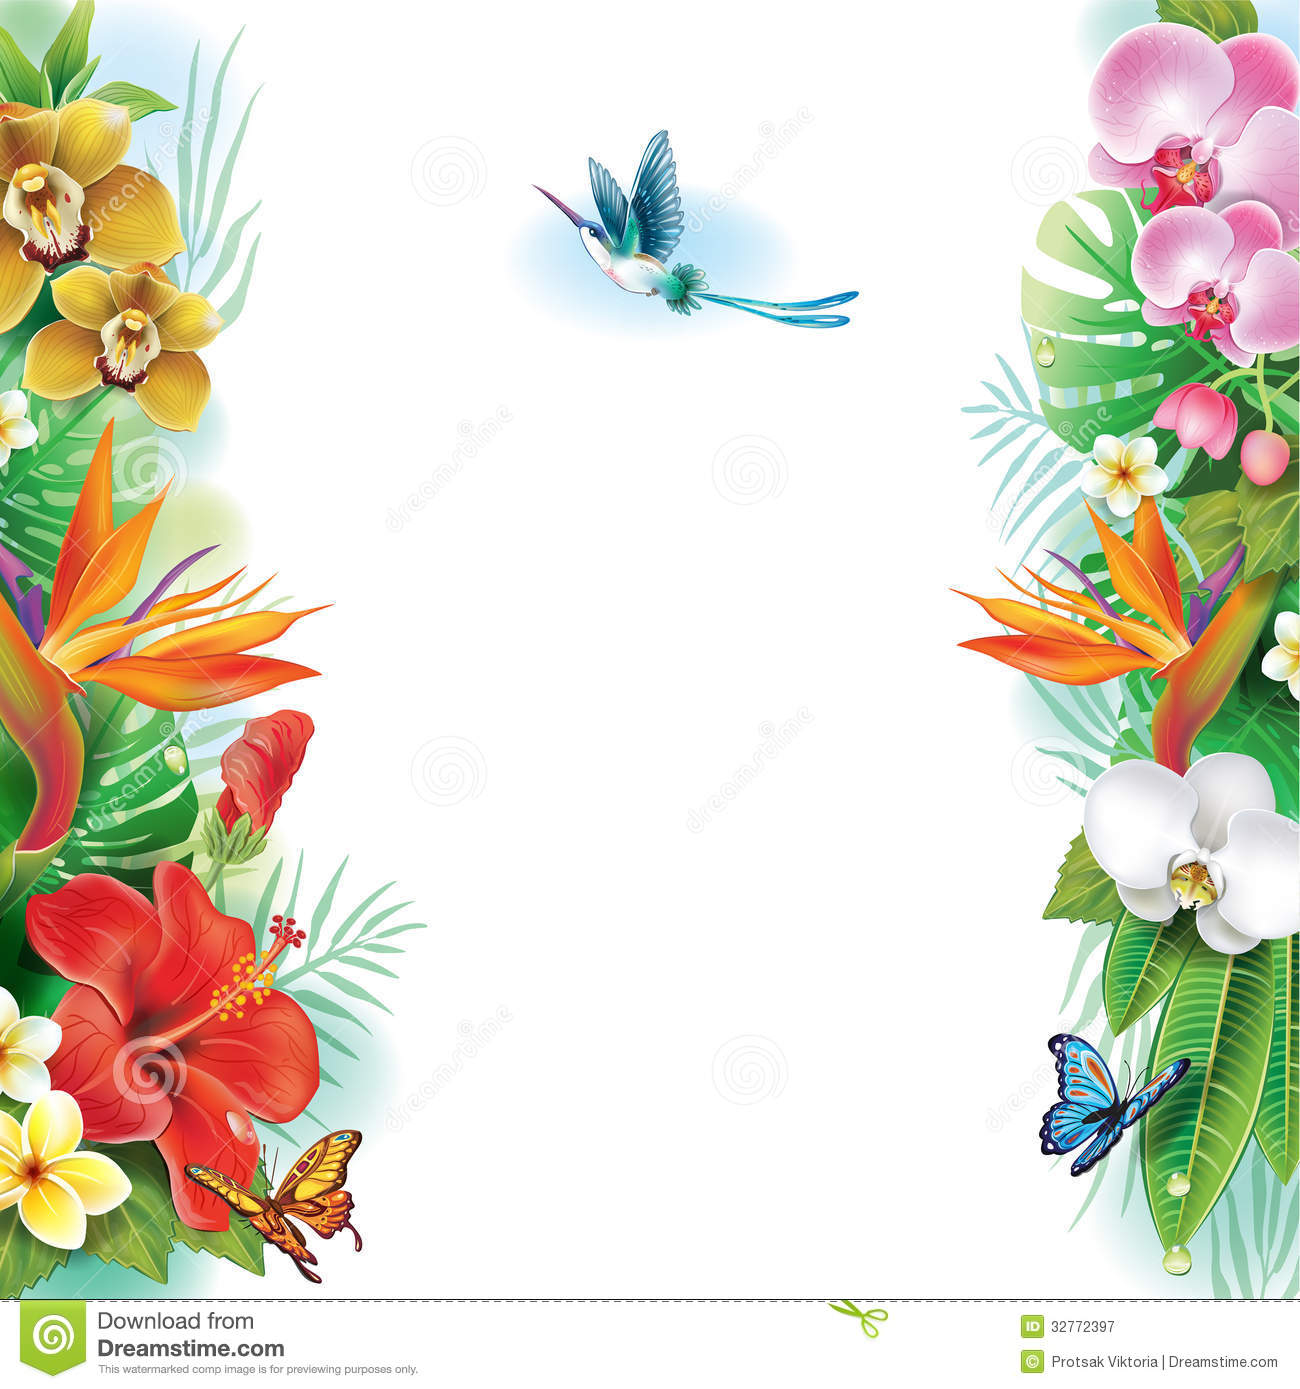 Clip Art Flower Border Border From Tropical Flowers And Leaves Royalty